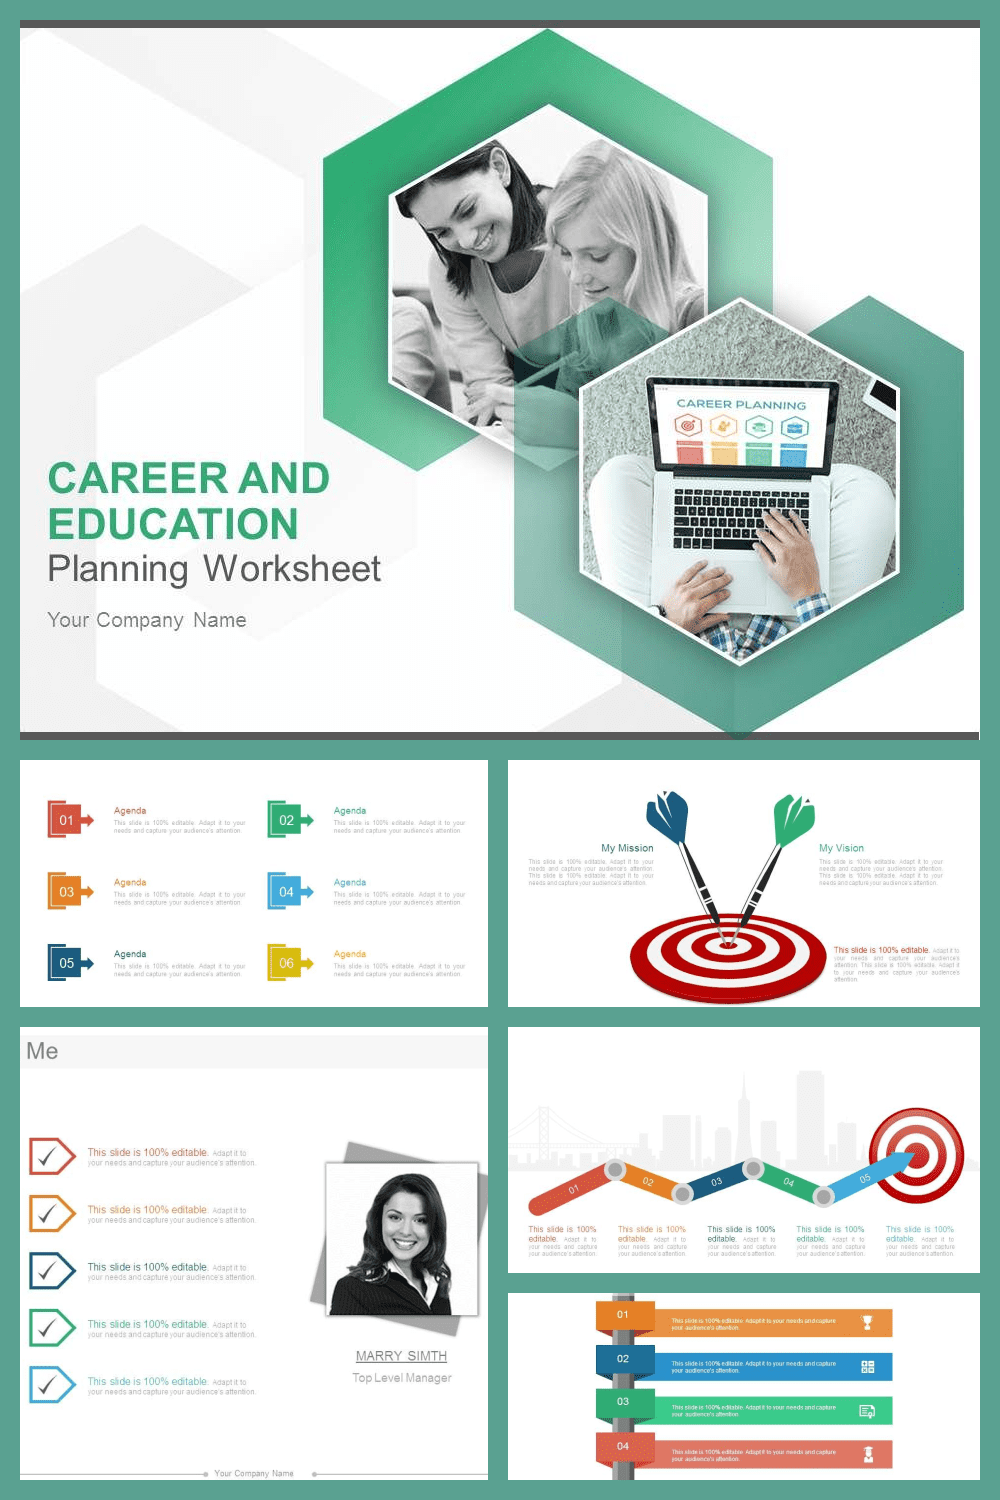 Career and education planning worksheet powerpoint template.